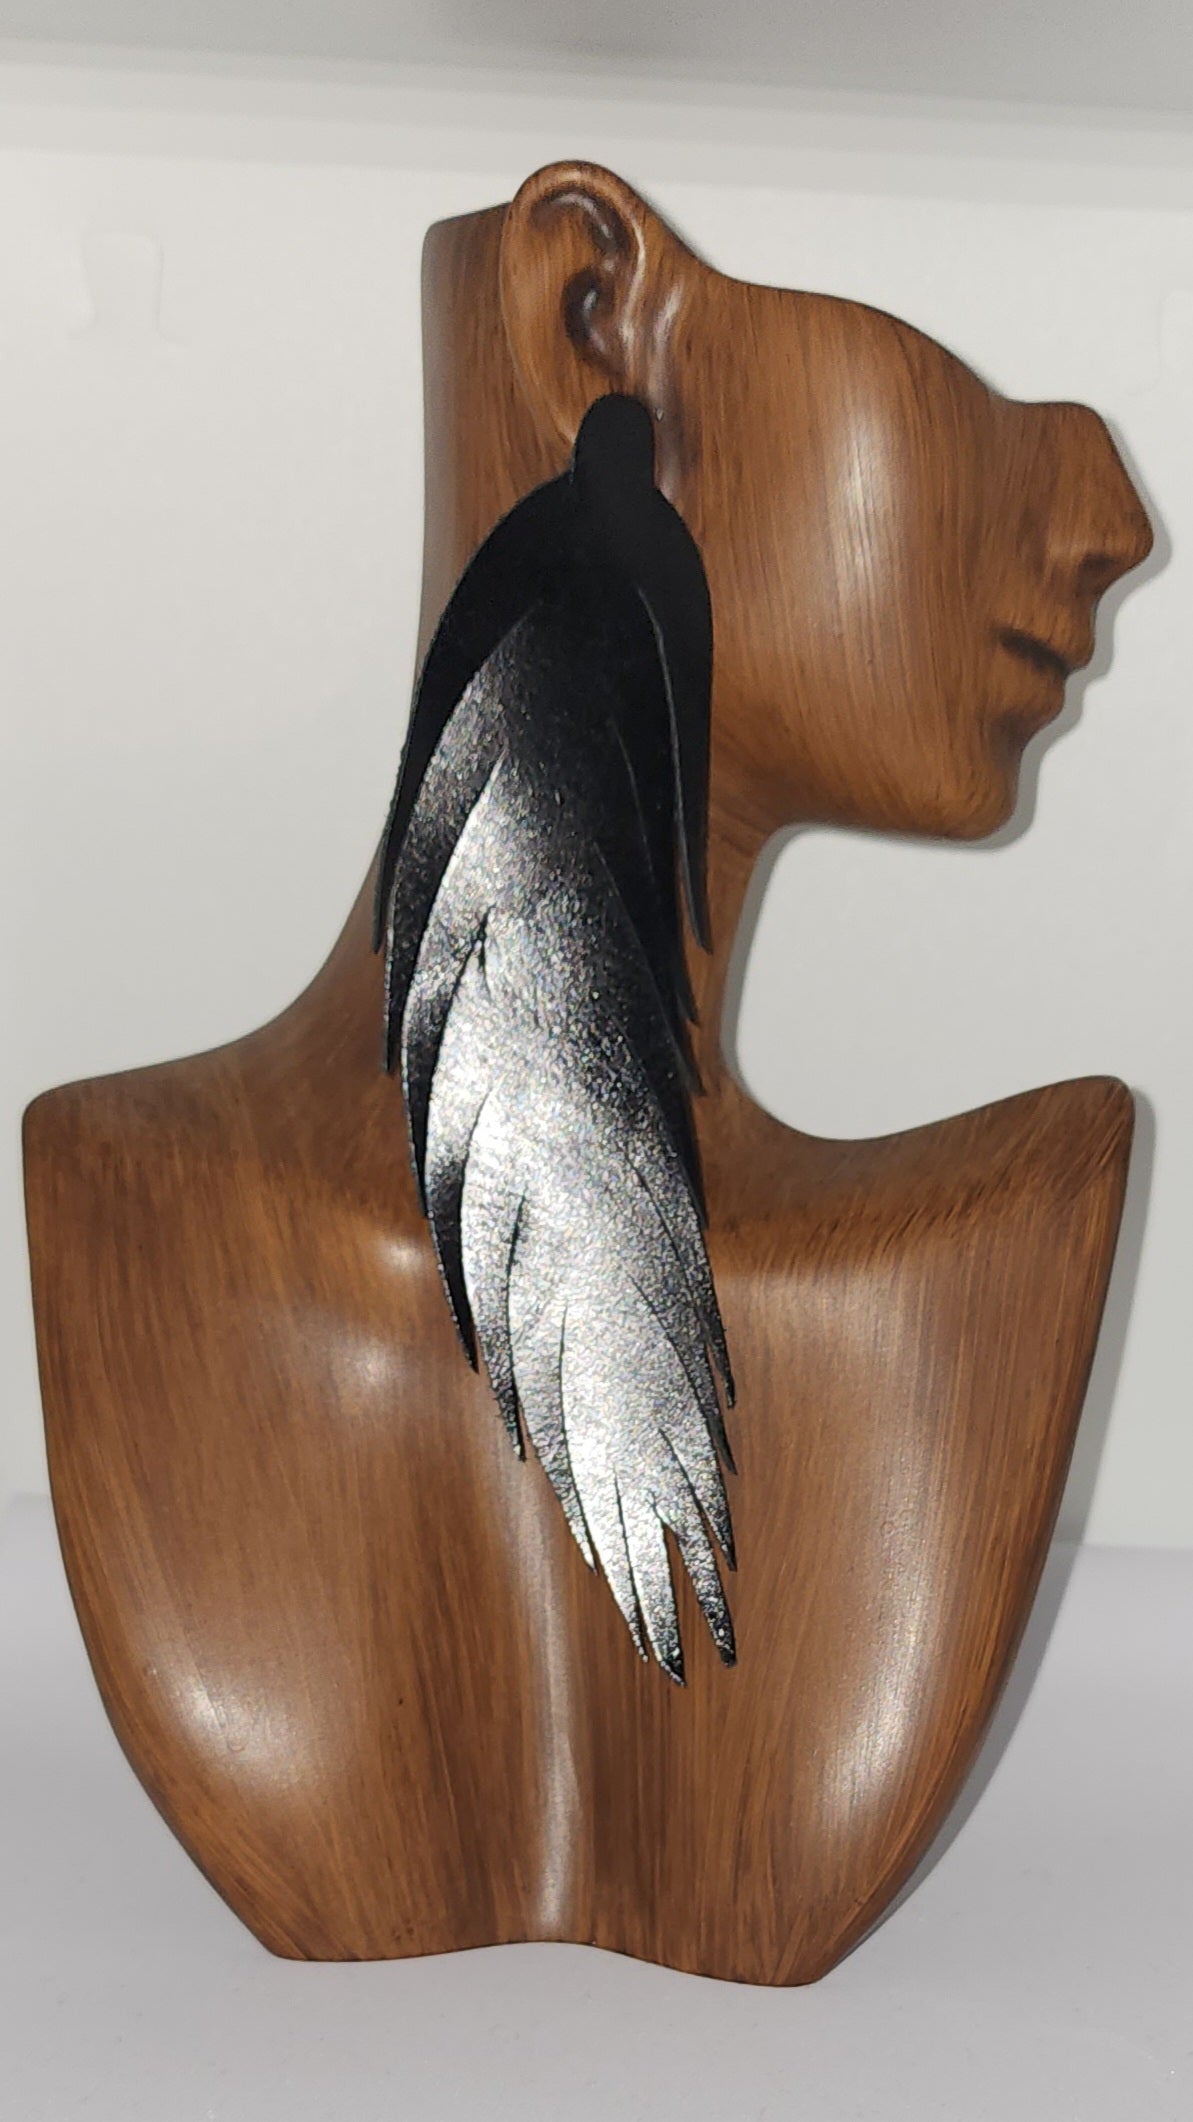 Black Genuine Leather Feather Earrings